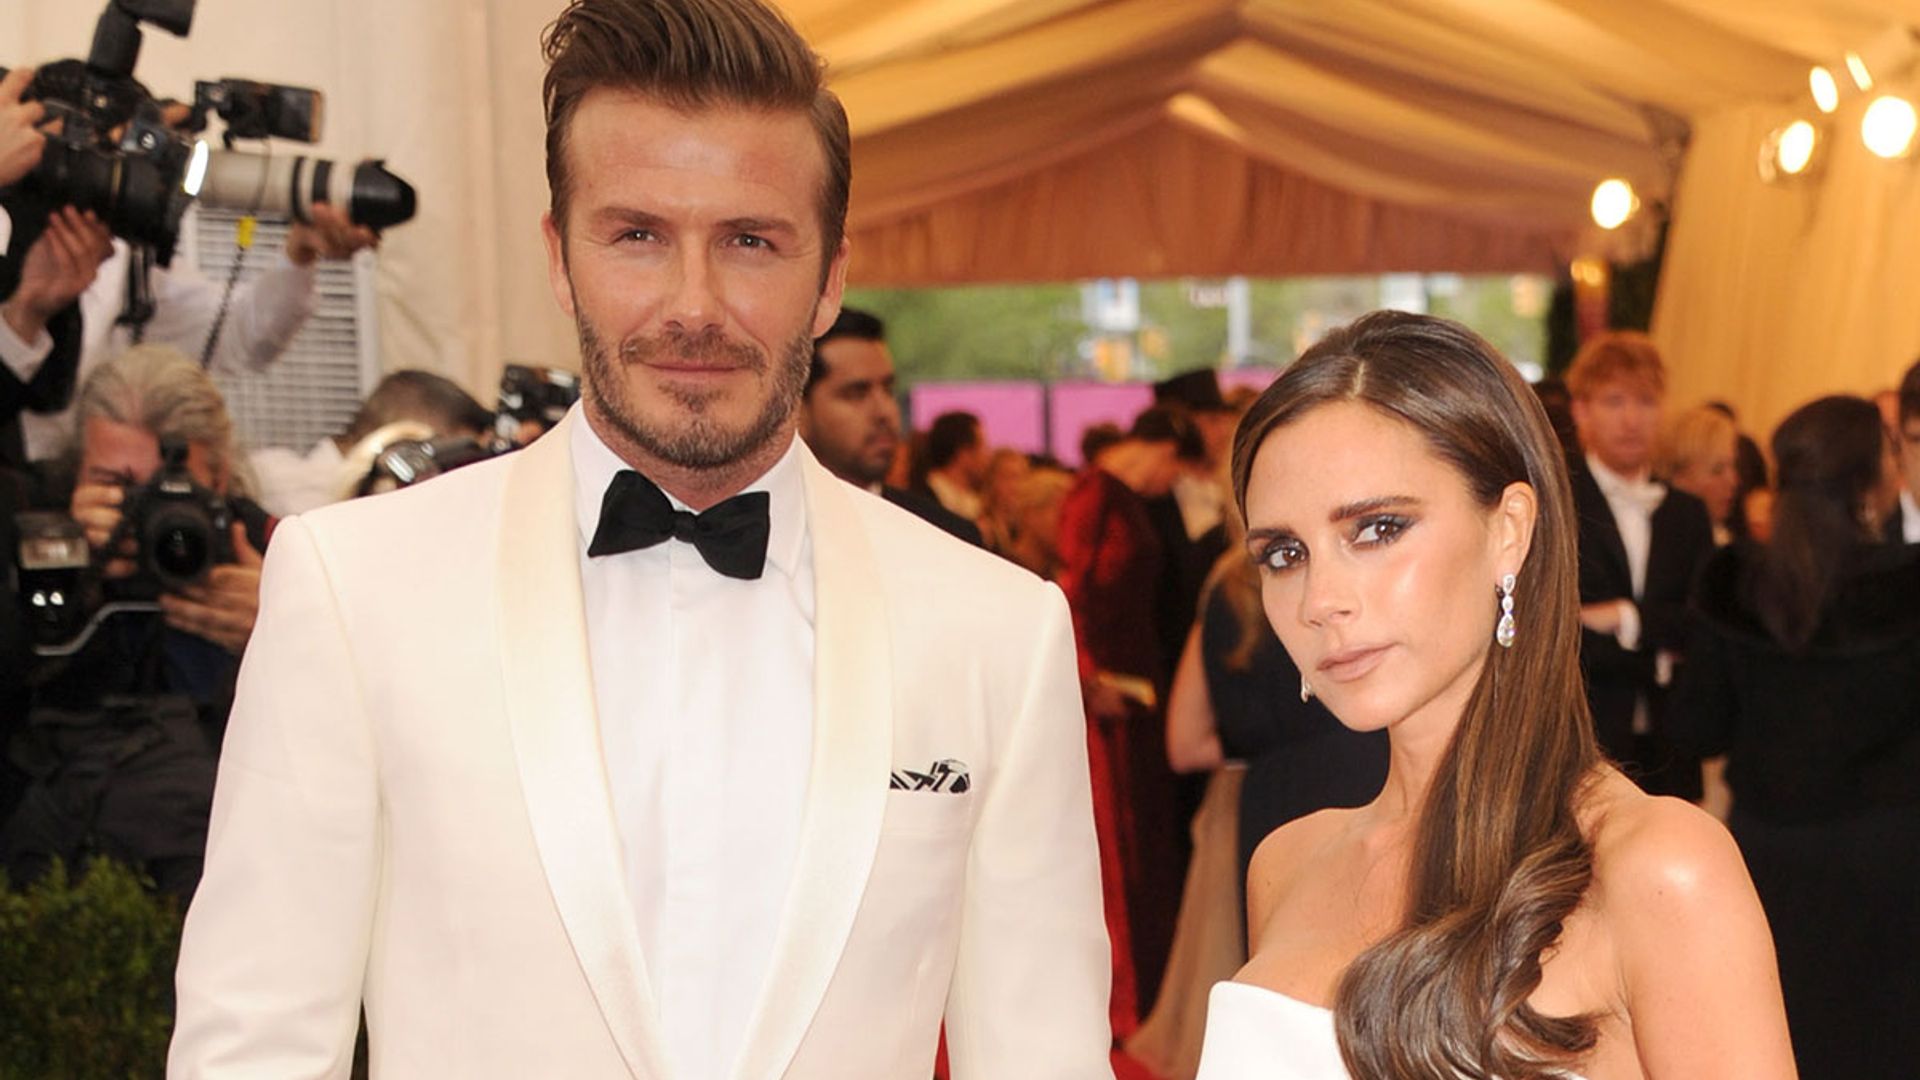 Victoria and David Beckham's £750k castle wedding was more extravagant than we expected - inside